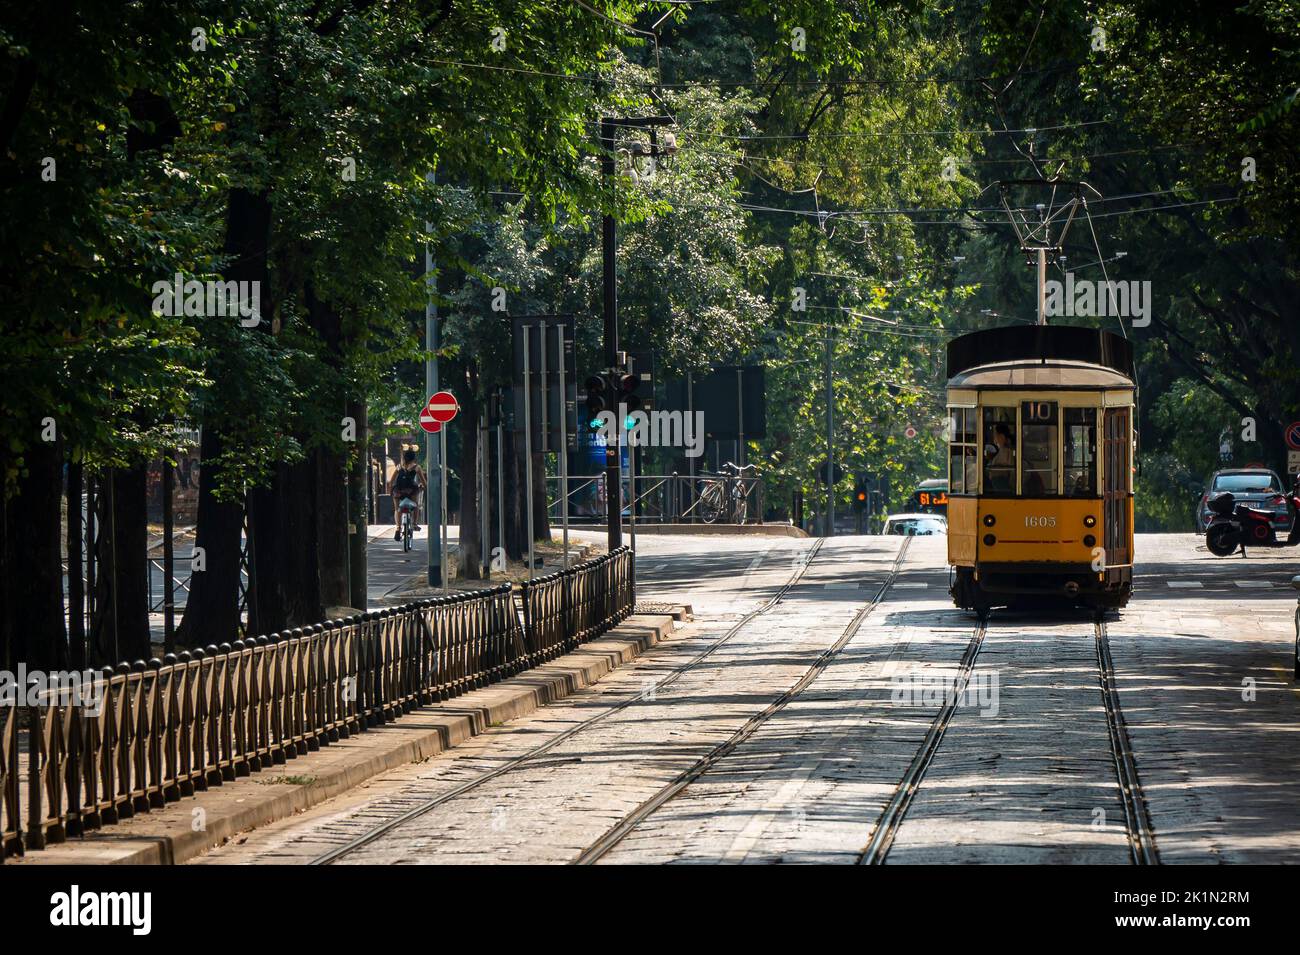 Old tram in the streets of Milan Stock Photo